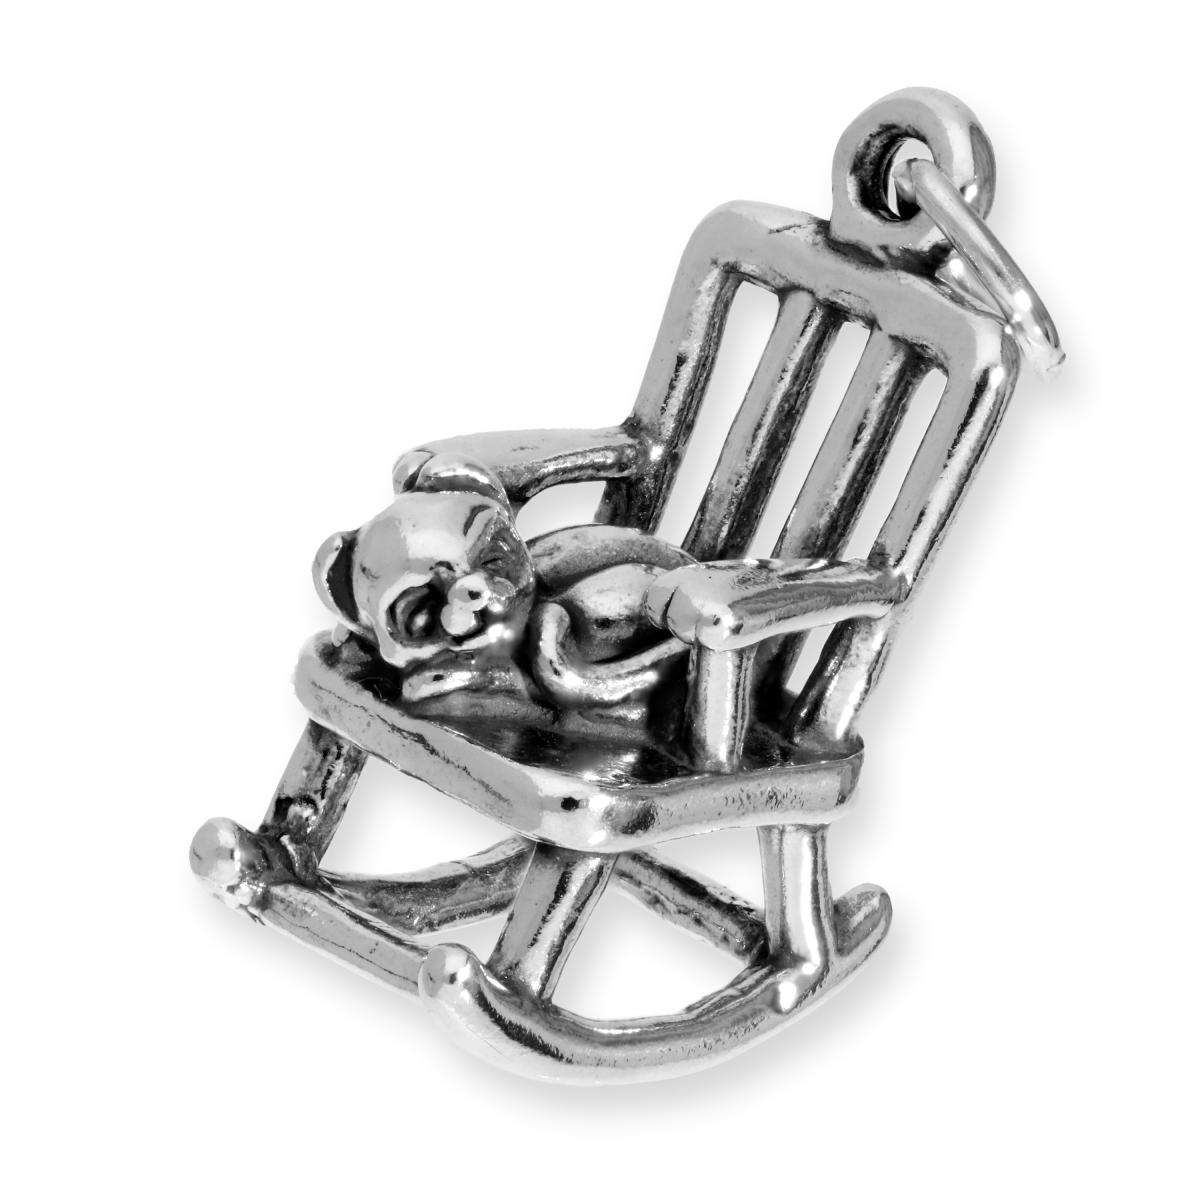 Online Solid Sterling Silver Charm Manufacturer |Manufacturer Rocking Chair With Cat Charm|